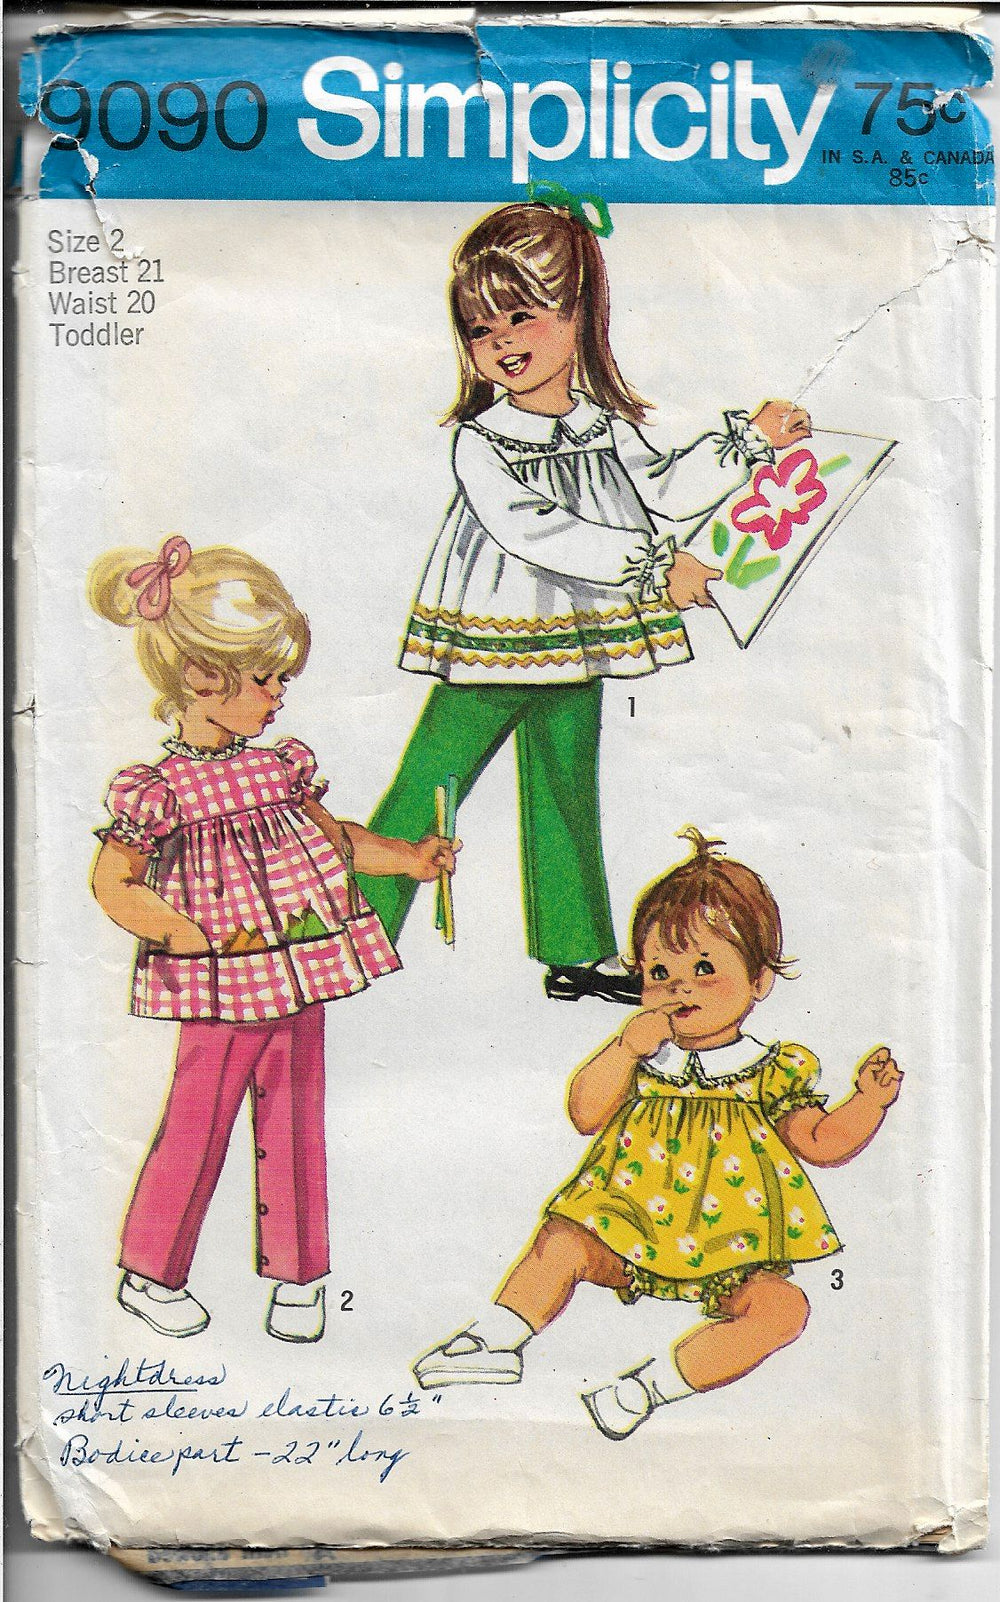 Simplicity 9090 Toddler Lace Trimmed Top Bloomers Pants Vintage Sewing Pattern 1970s - VintageStitching - Vintage Sewing Patterns